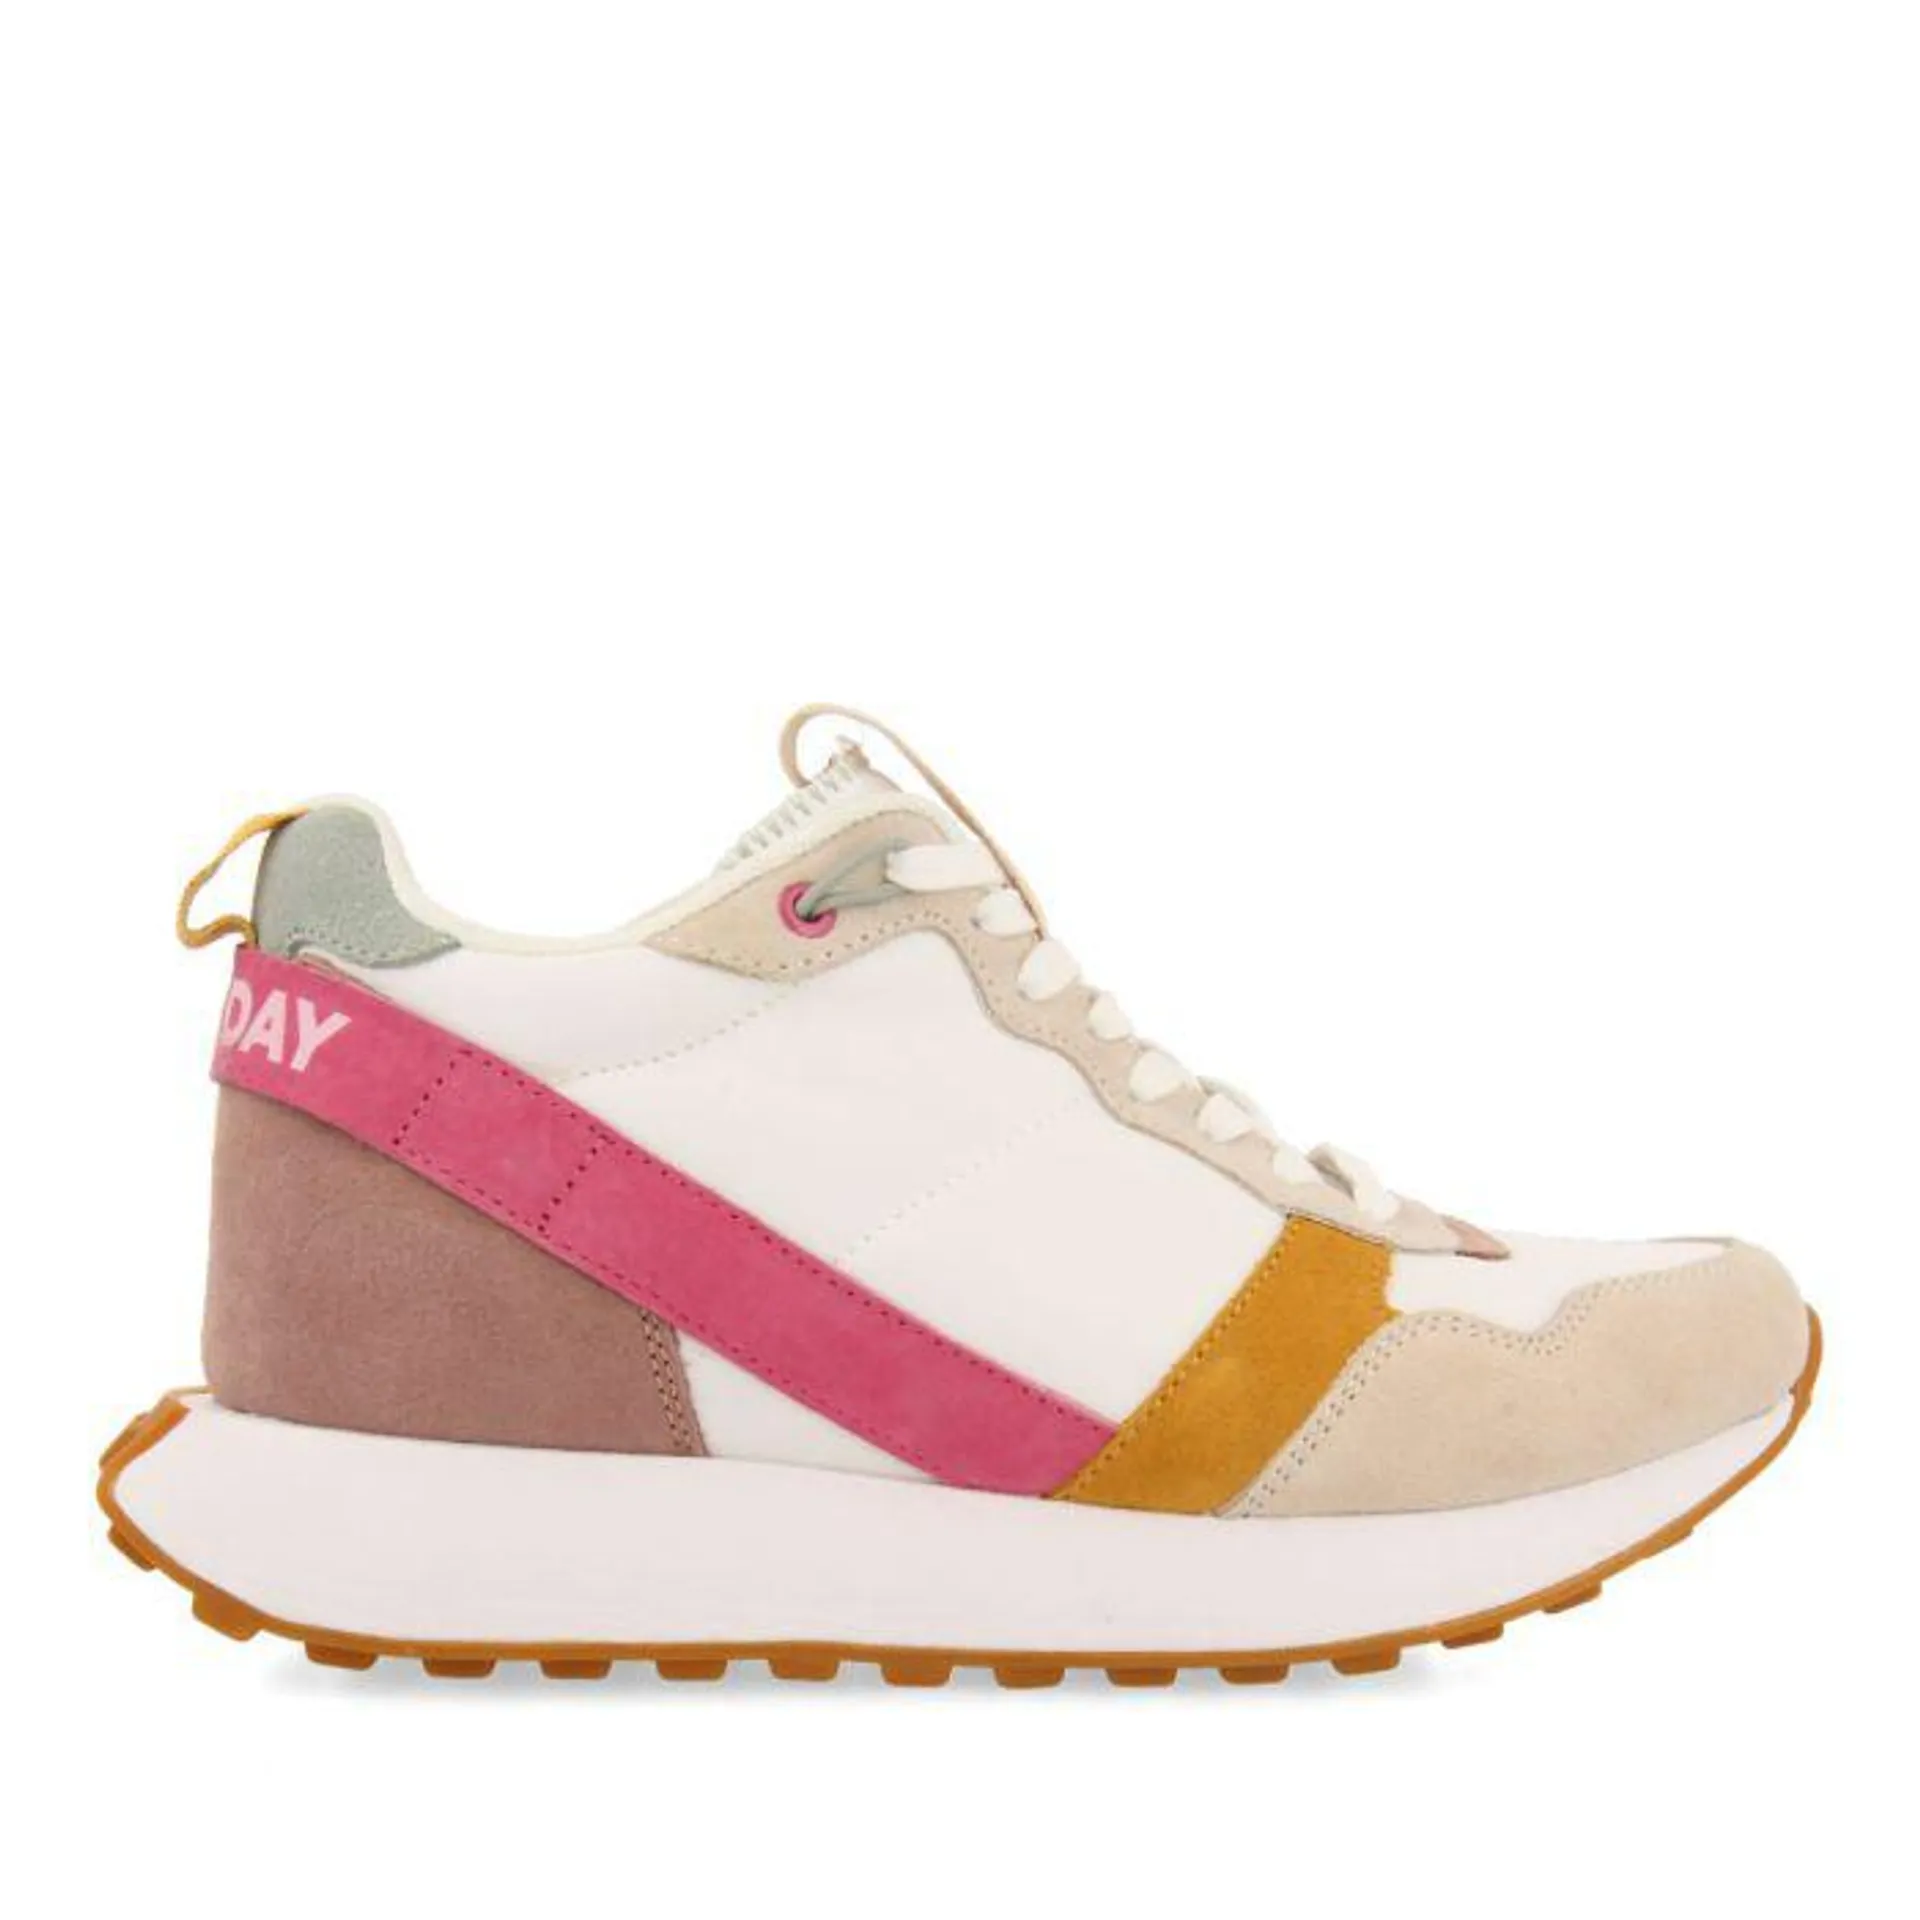 Vincly women's white retro-style sneakers with inner wedges